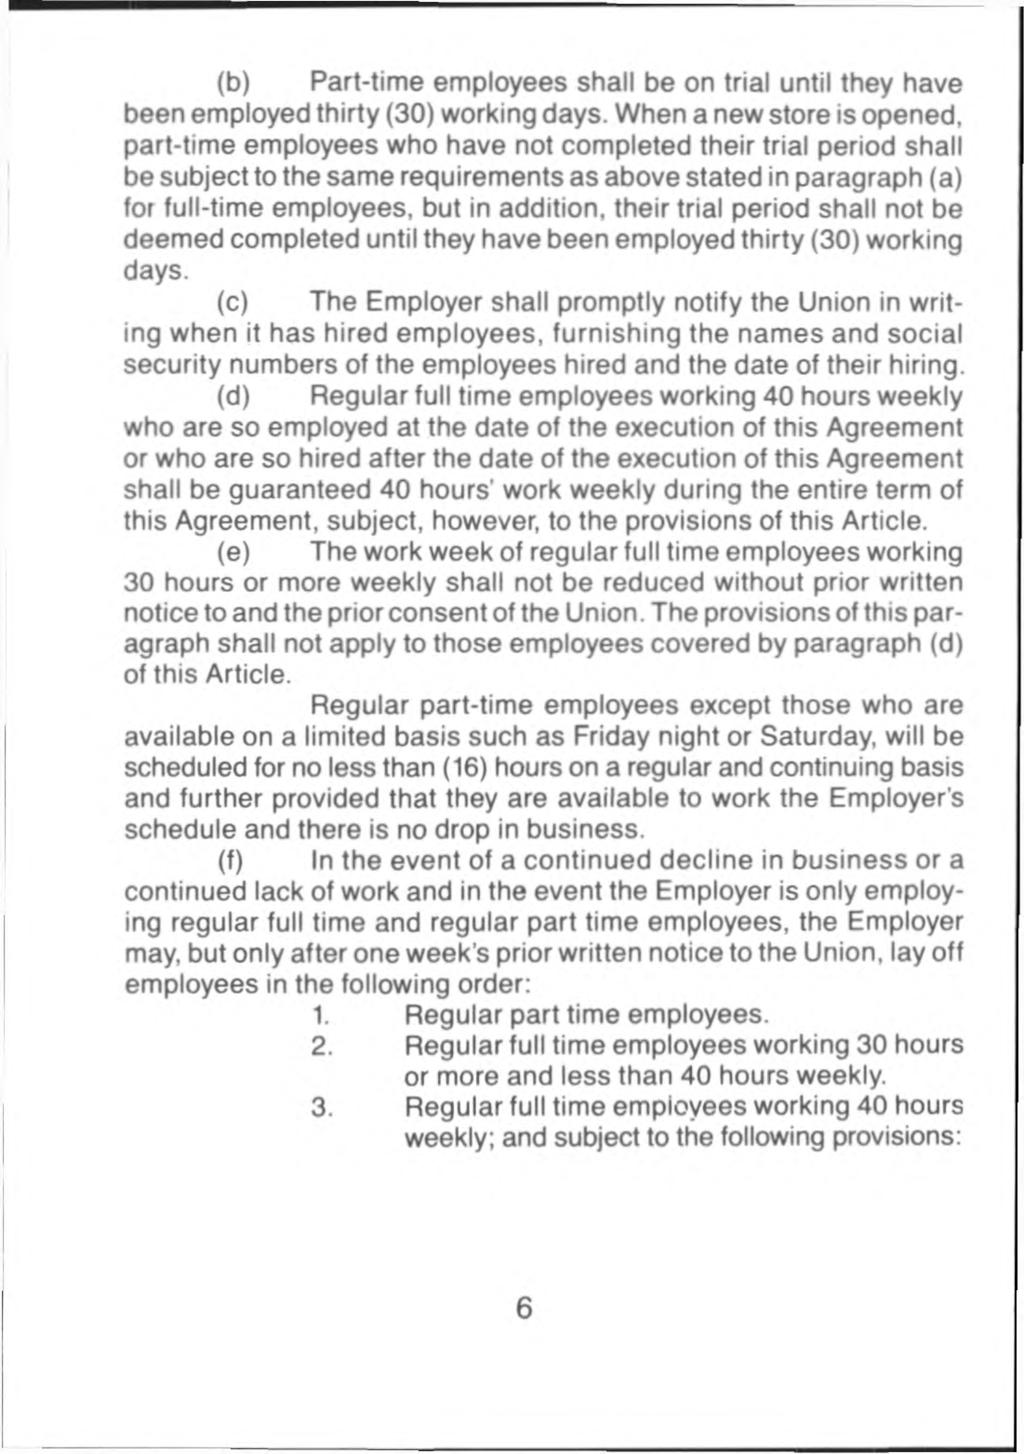 (b) Part-time employees shall be on trial until they have been employed thirty (30) working days.